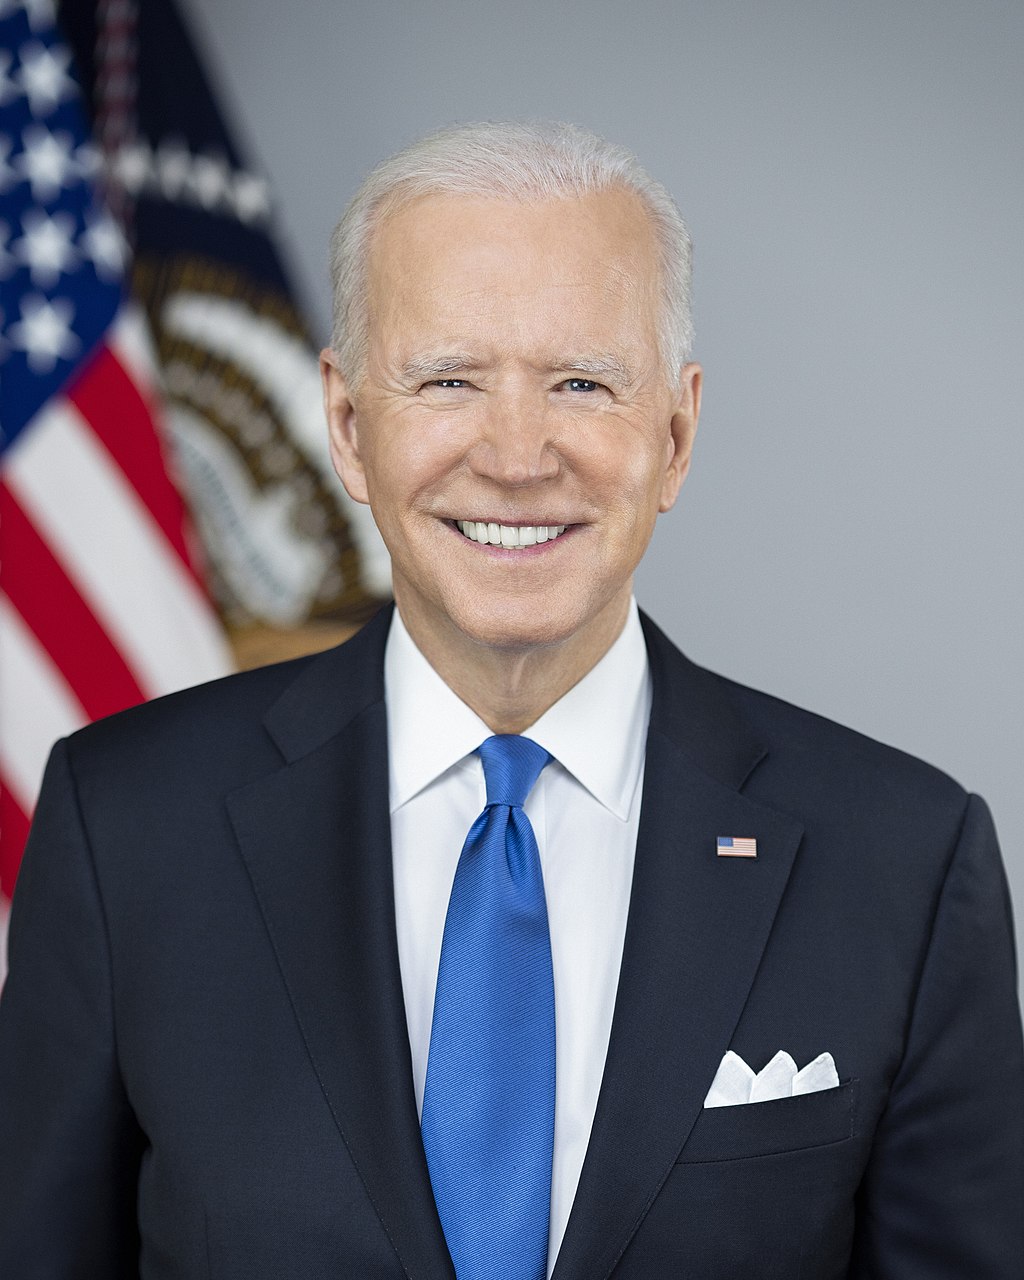 YOU COULDN’T MAKE IT UP! Biden’s clown campaign plans to stay on TikTok — while its clueless boss bans the app 🤡